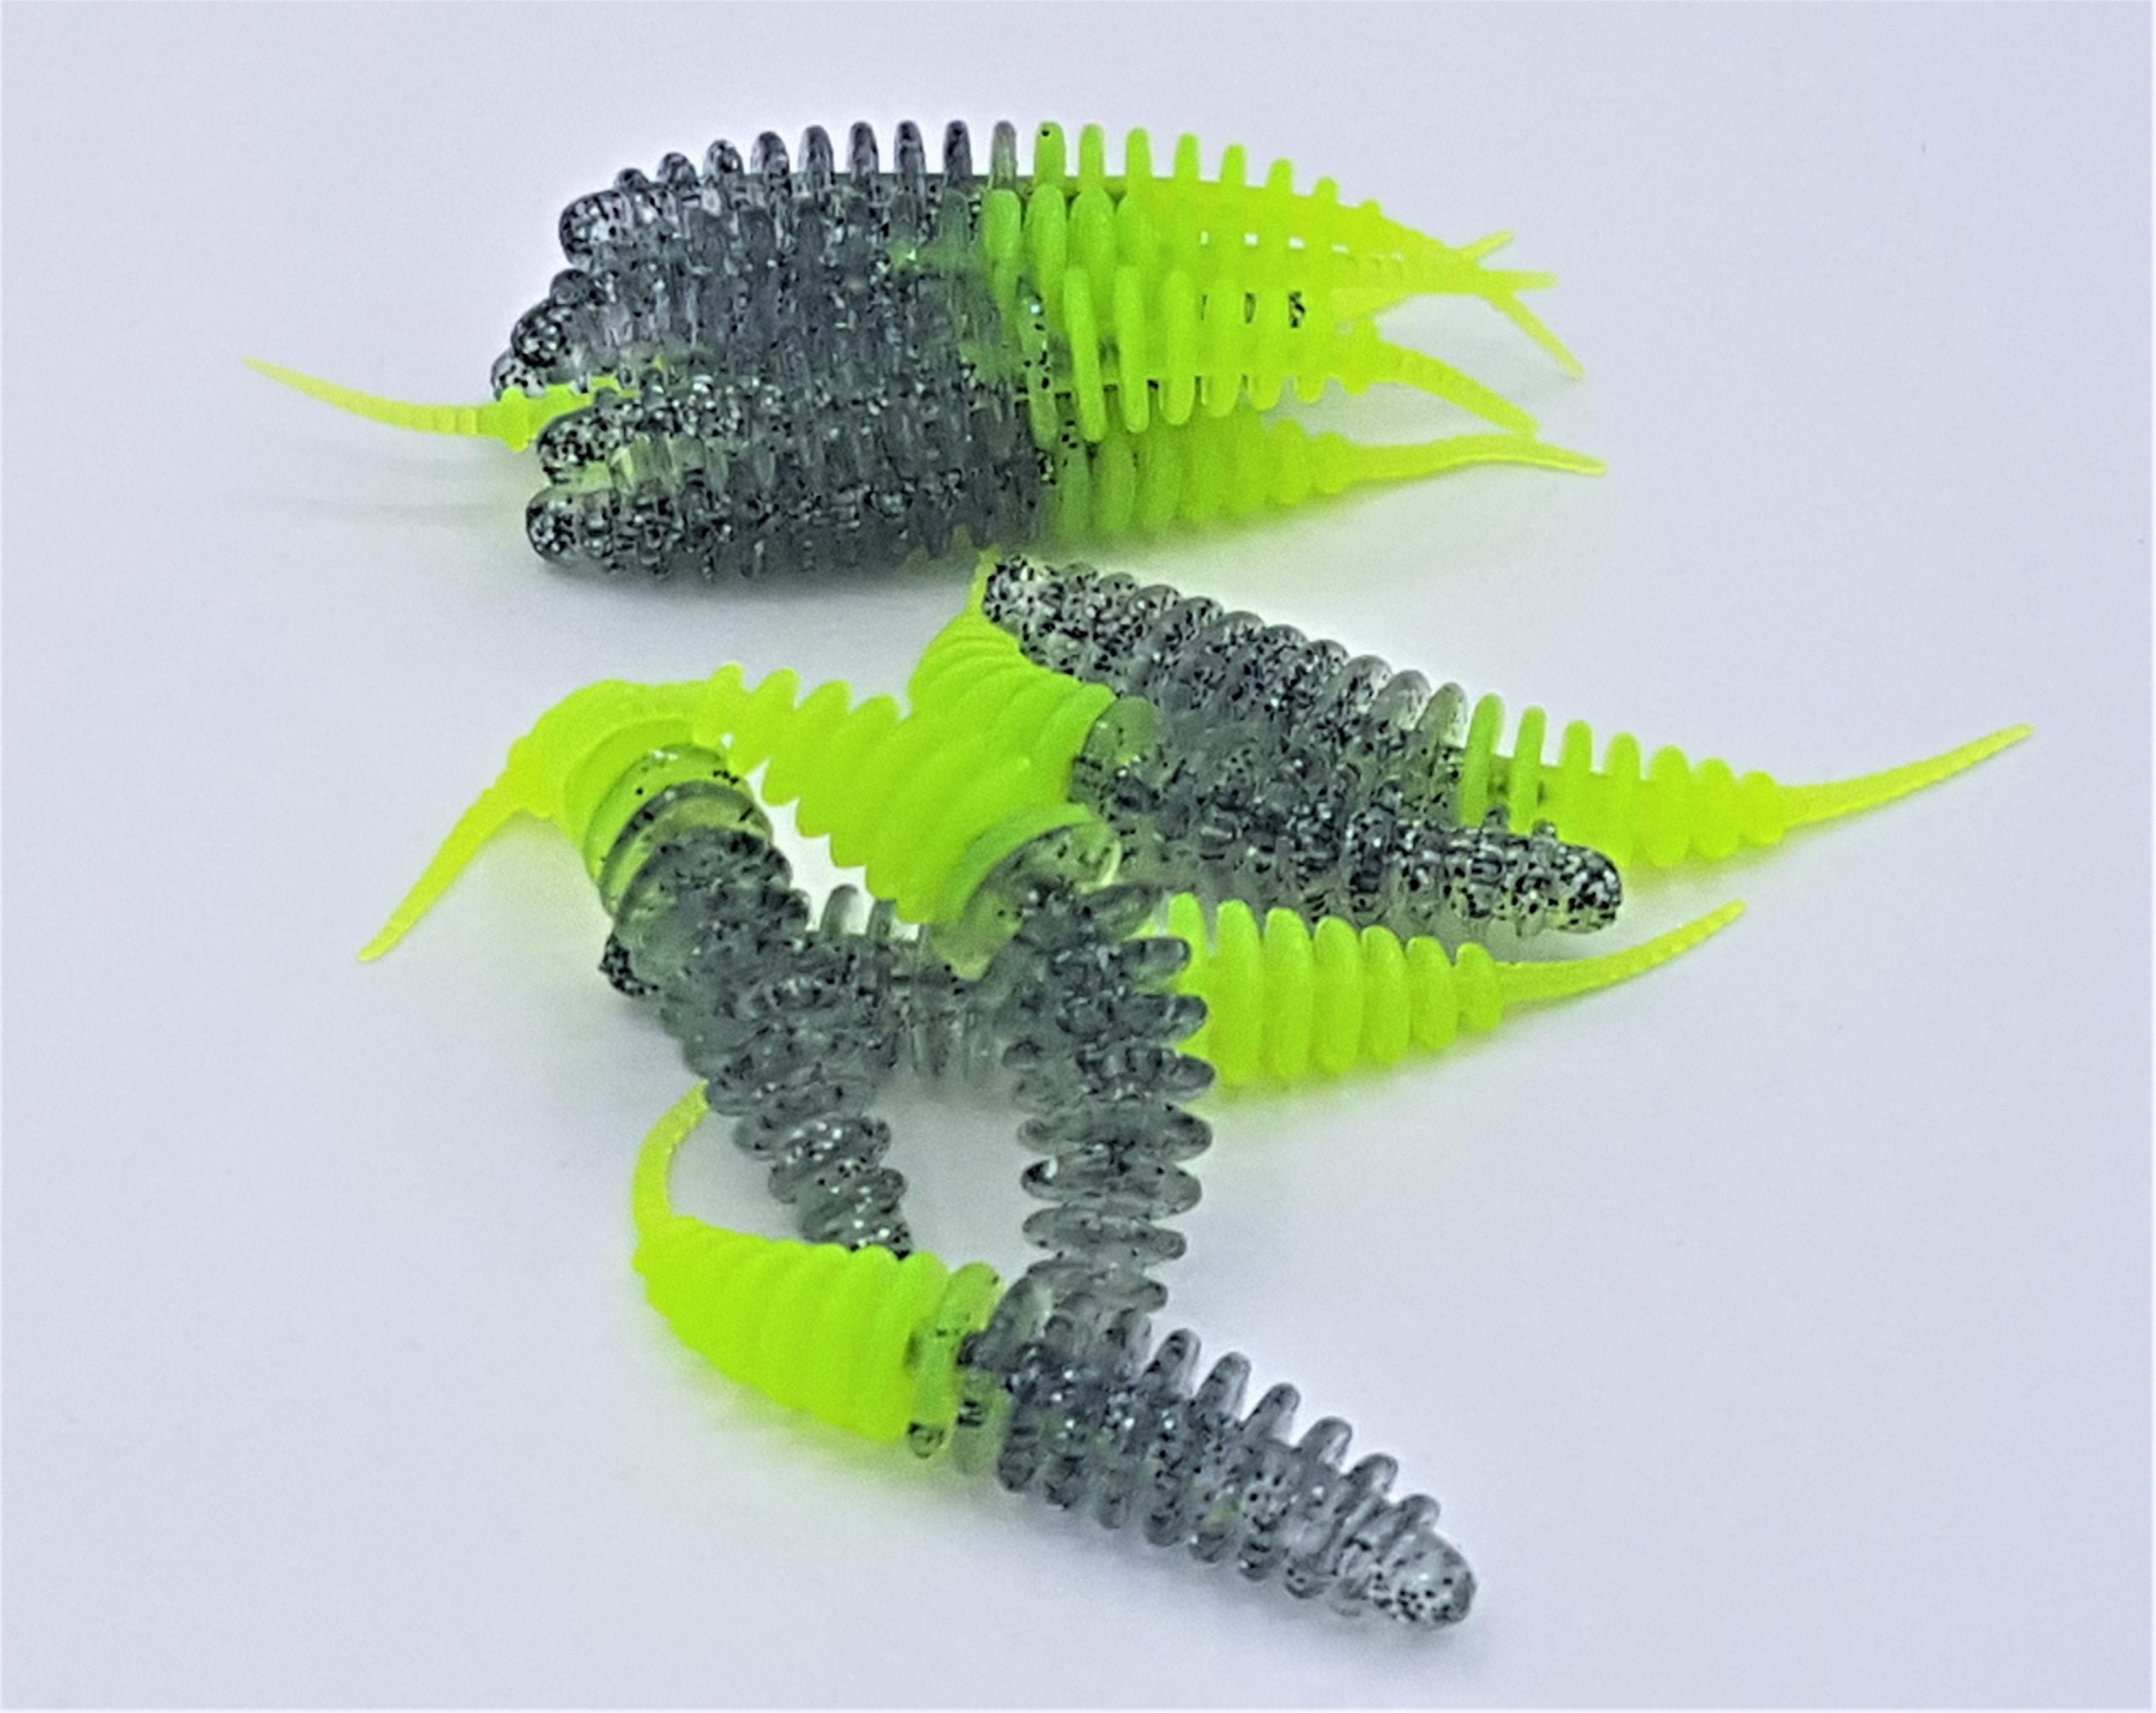 ProBaits Mini Custom Lures Troutworm Mega Soft / Knoblauch- Flavour In 3,8 Cm Länge / Farbe: Anthrazit-glitter-chartreuse